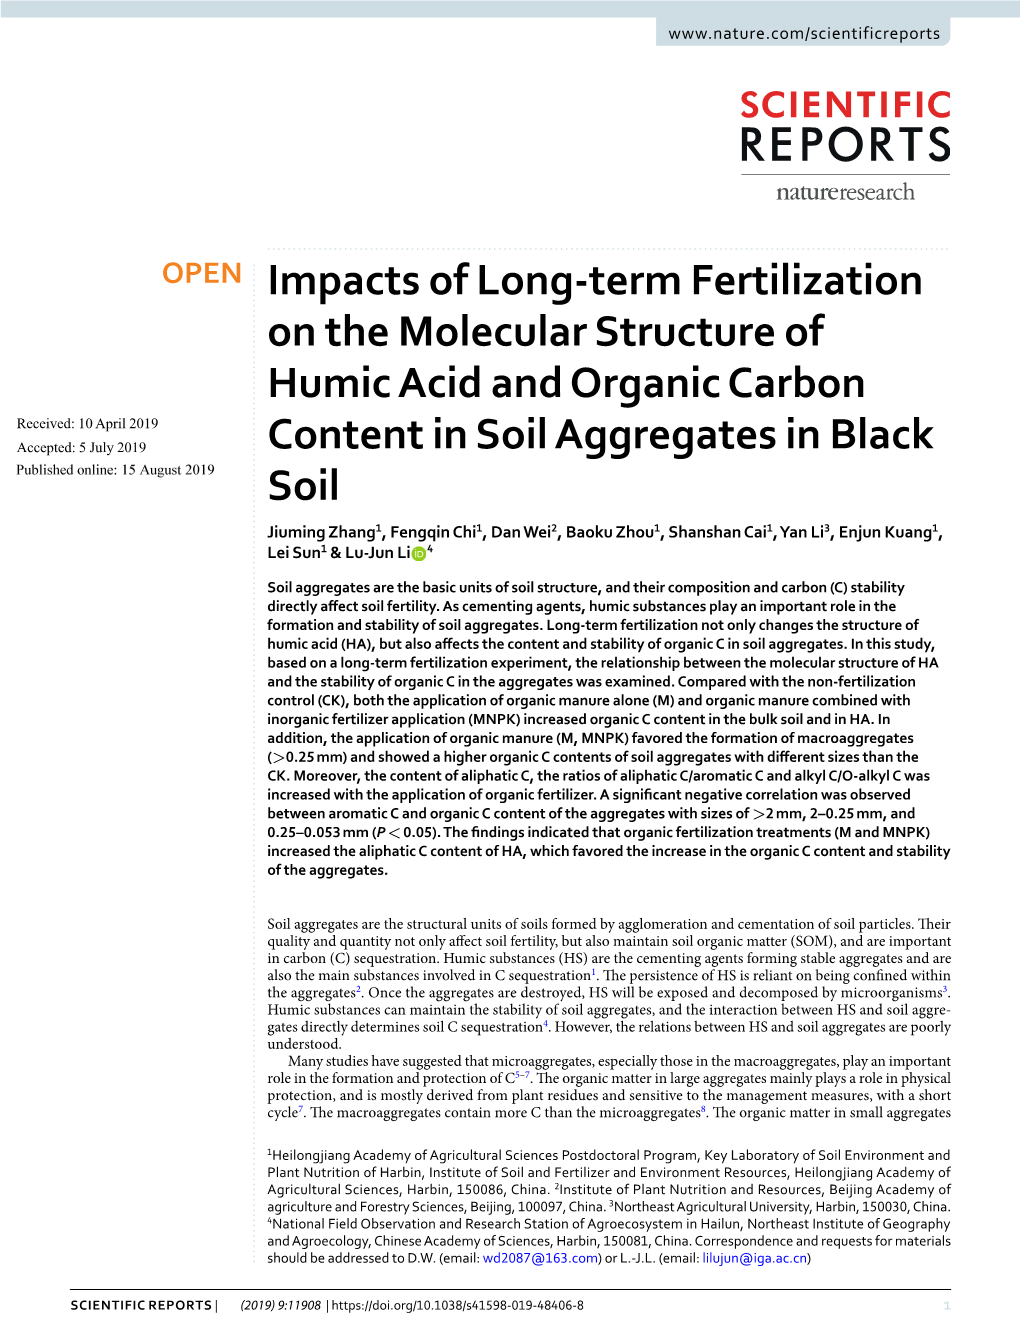 Impacts of Long-Term Fertilization on the Molecular Structure of Humic